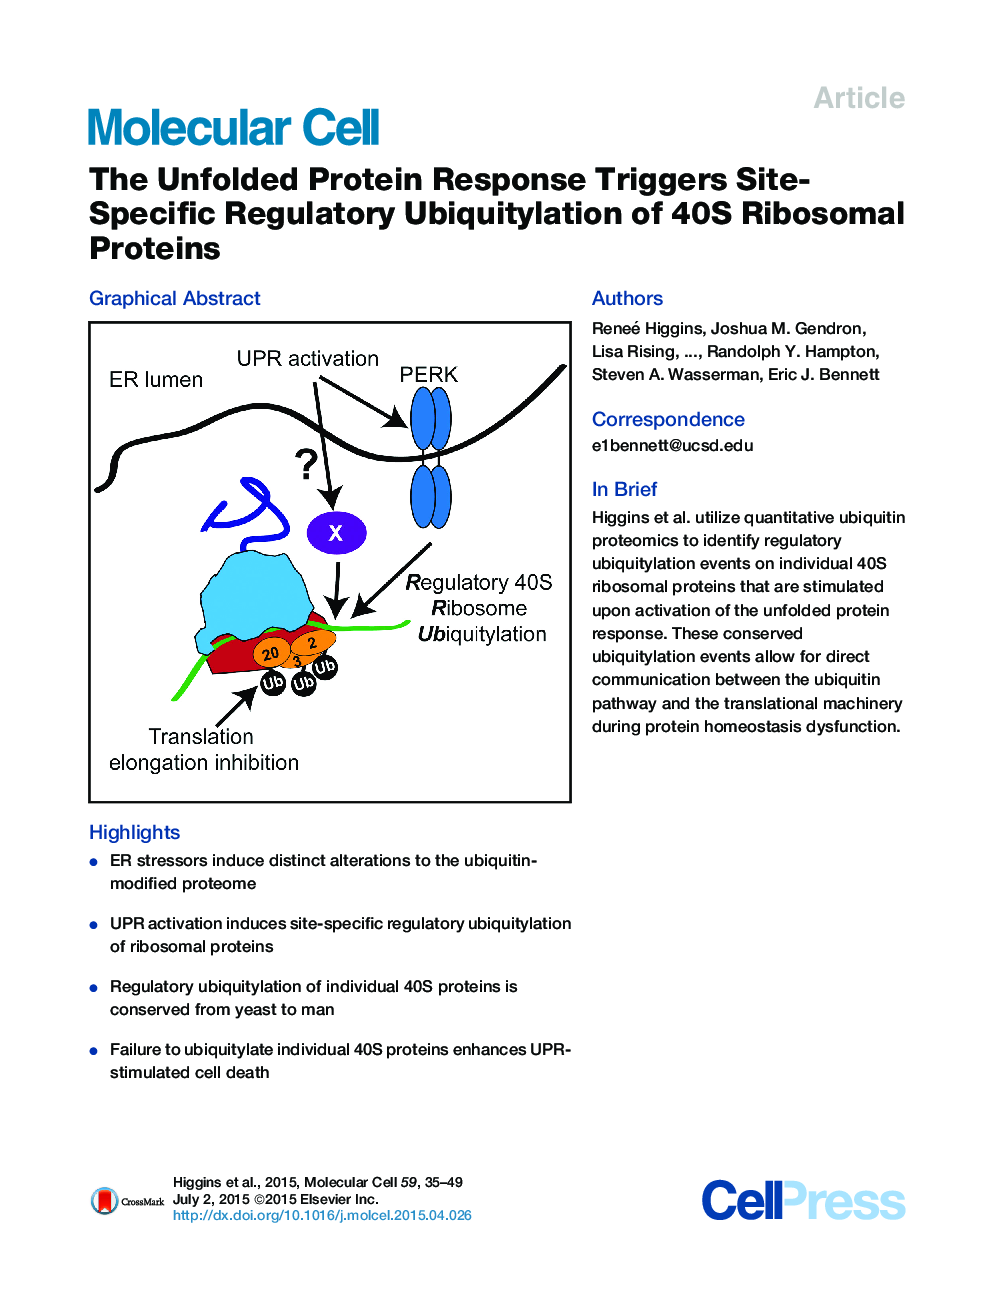 The Unfolded Protein Response Triggers Site-Specific Regulatory Ubiquitylation of 40S Ribosomal Proteins